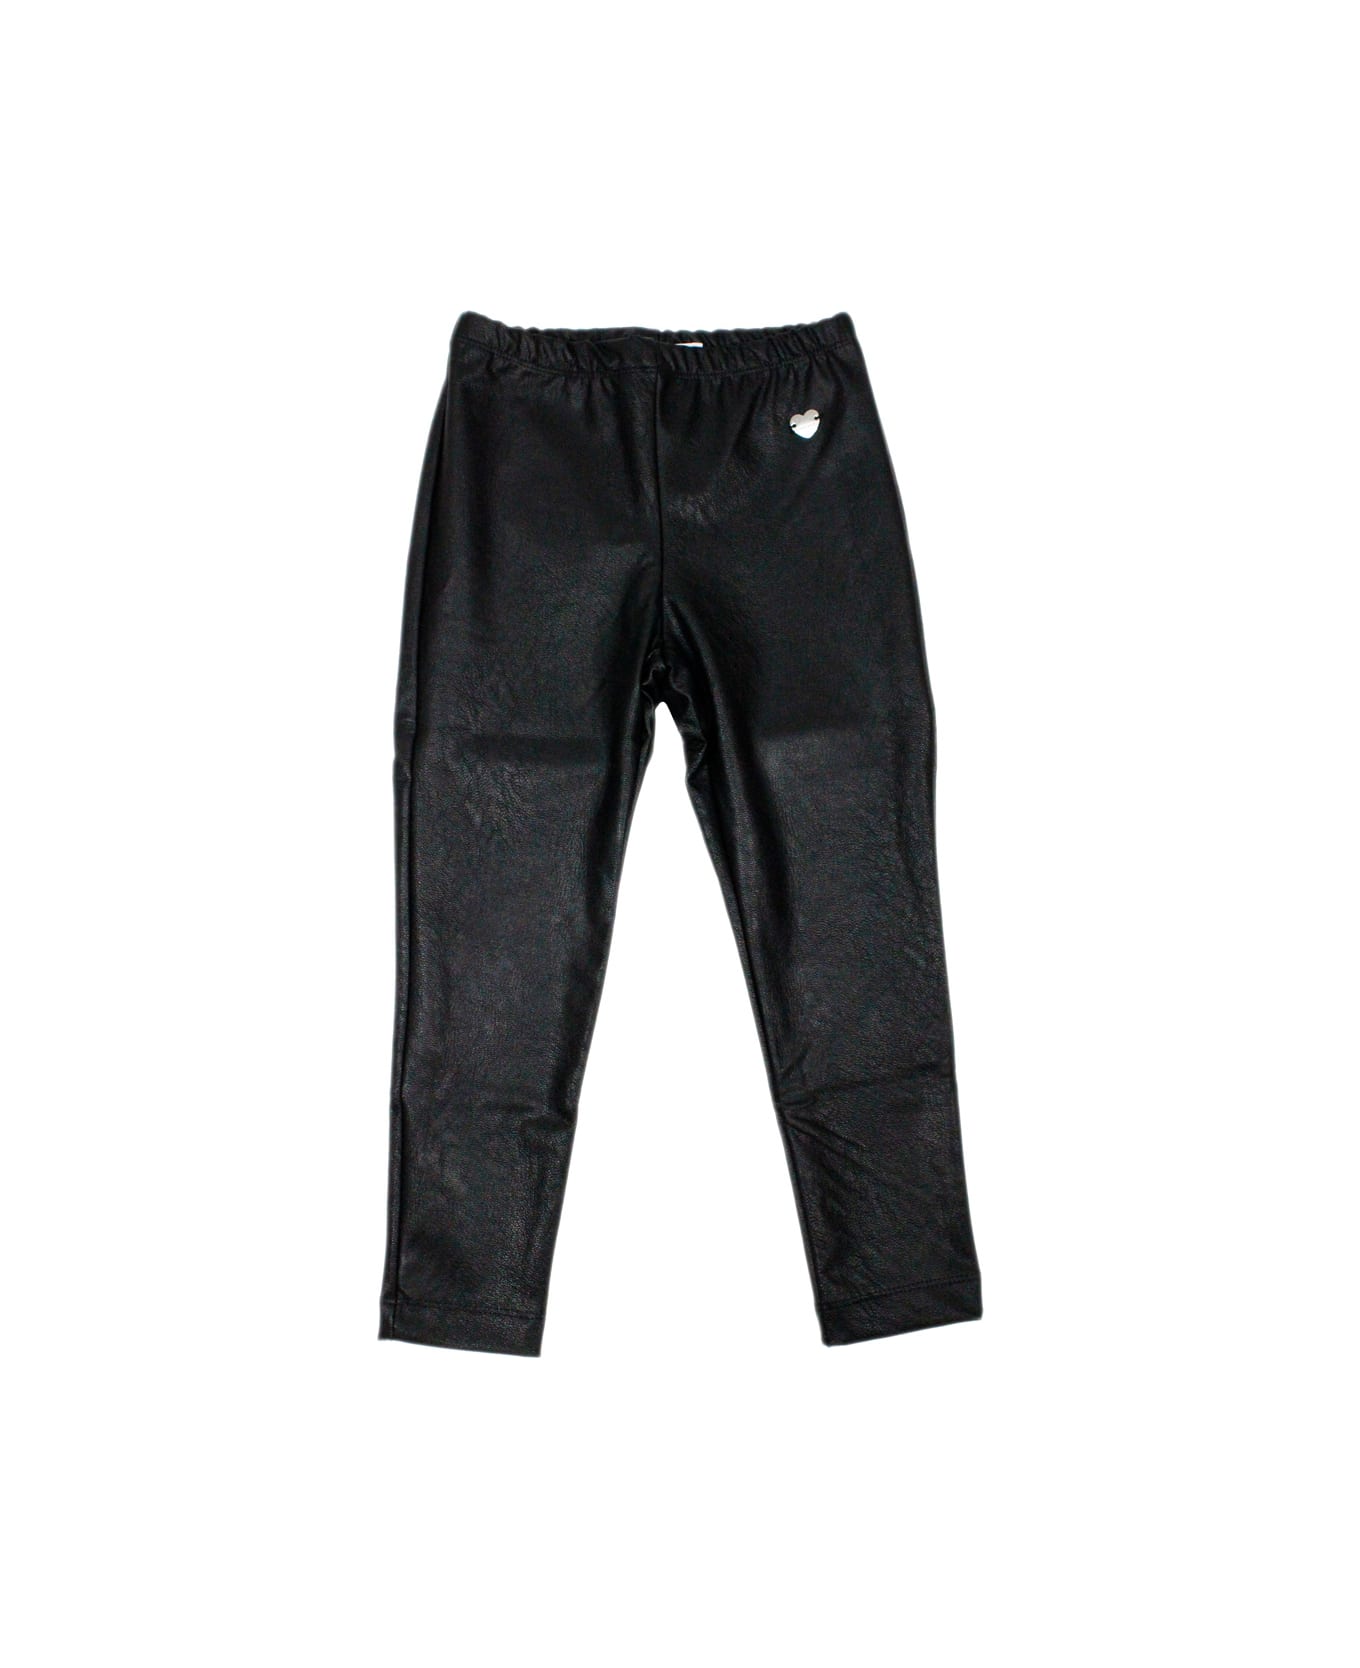 Monnalisa Leggings Trousers In Super Stretch Eco-leather With Applied Metal Heart - Black ボトムス